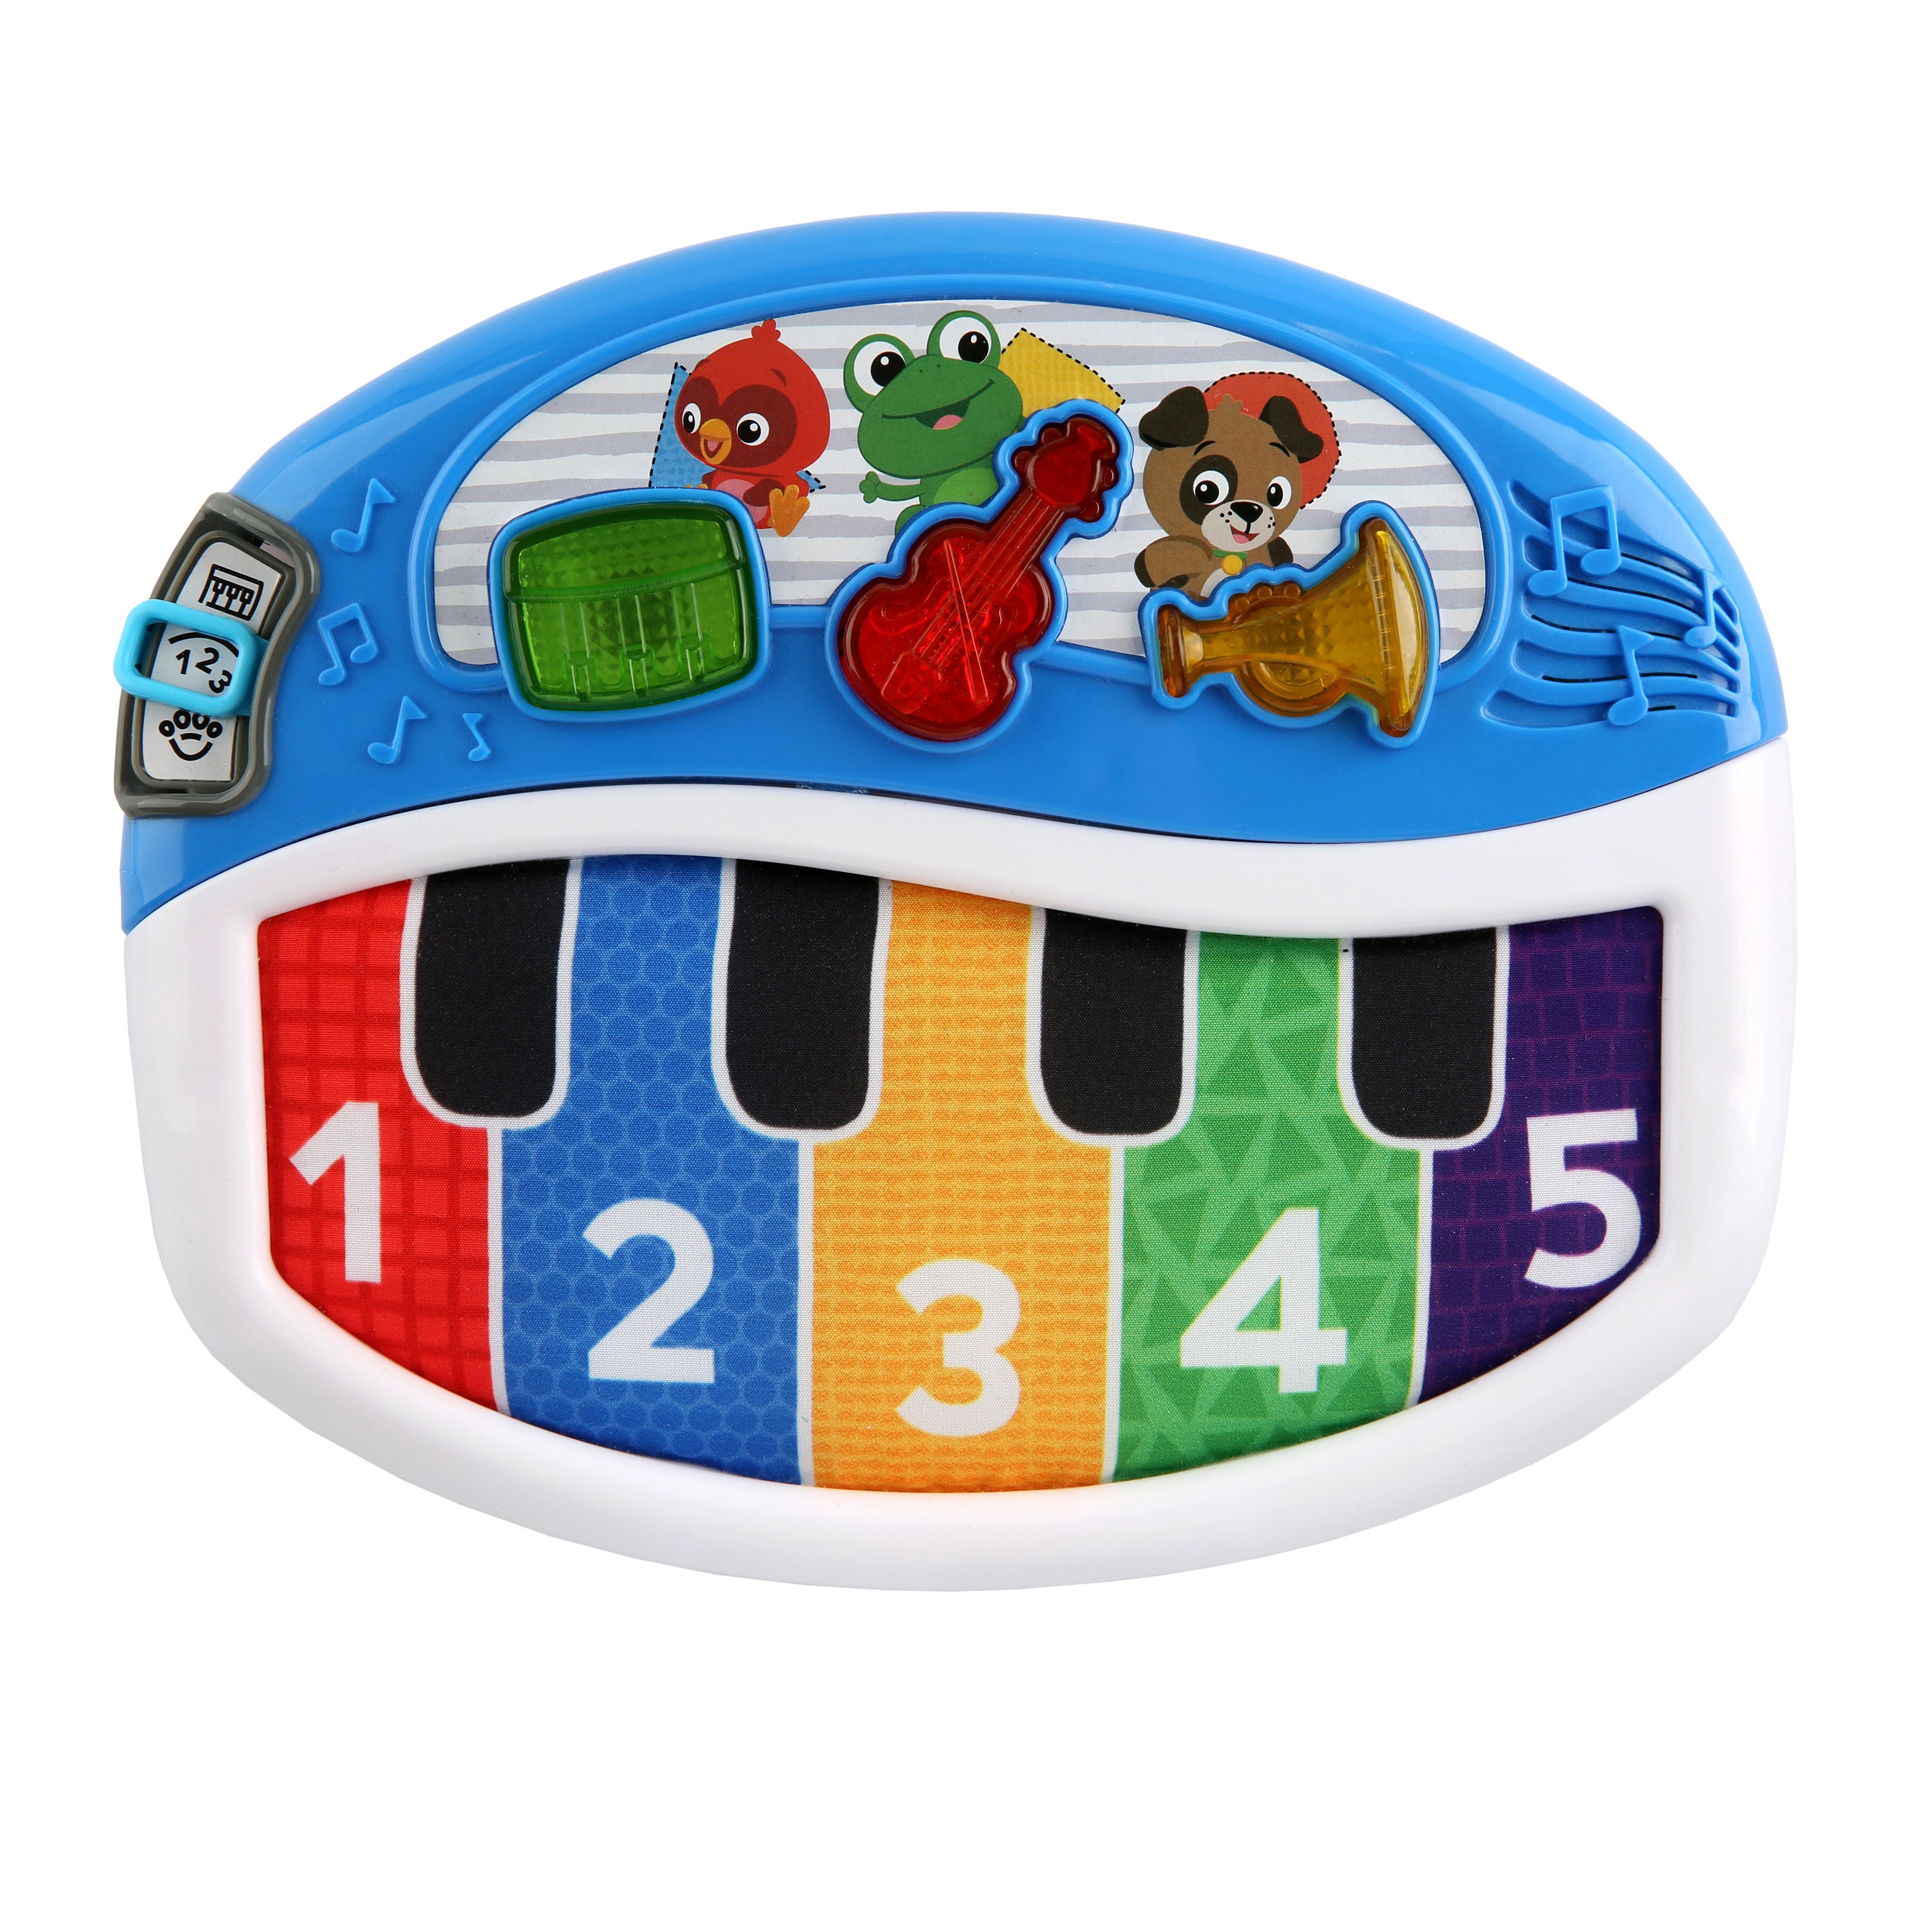 Play Baby Toys Discover And Play Music, Magical Piano With Sing